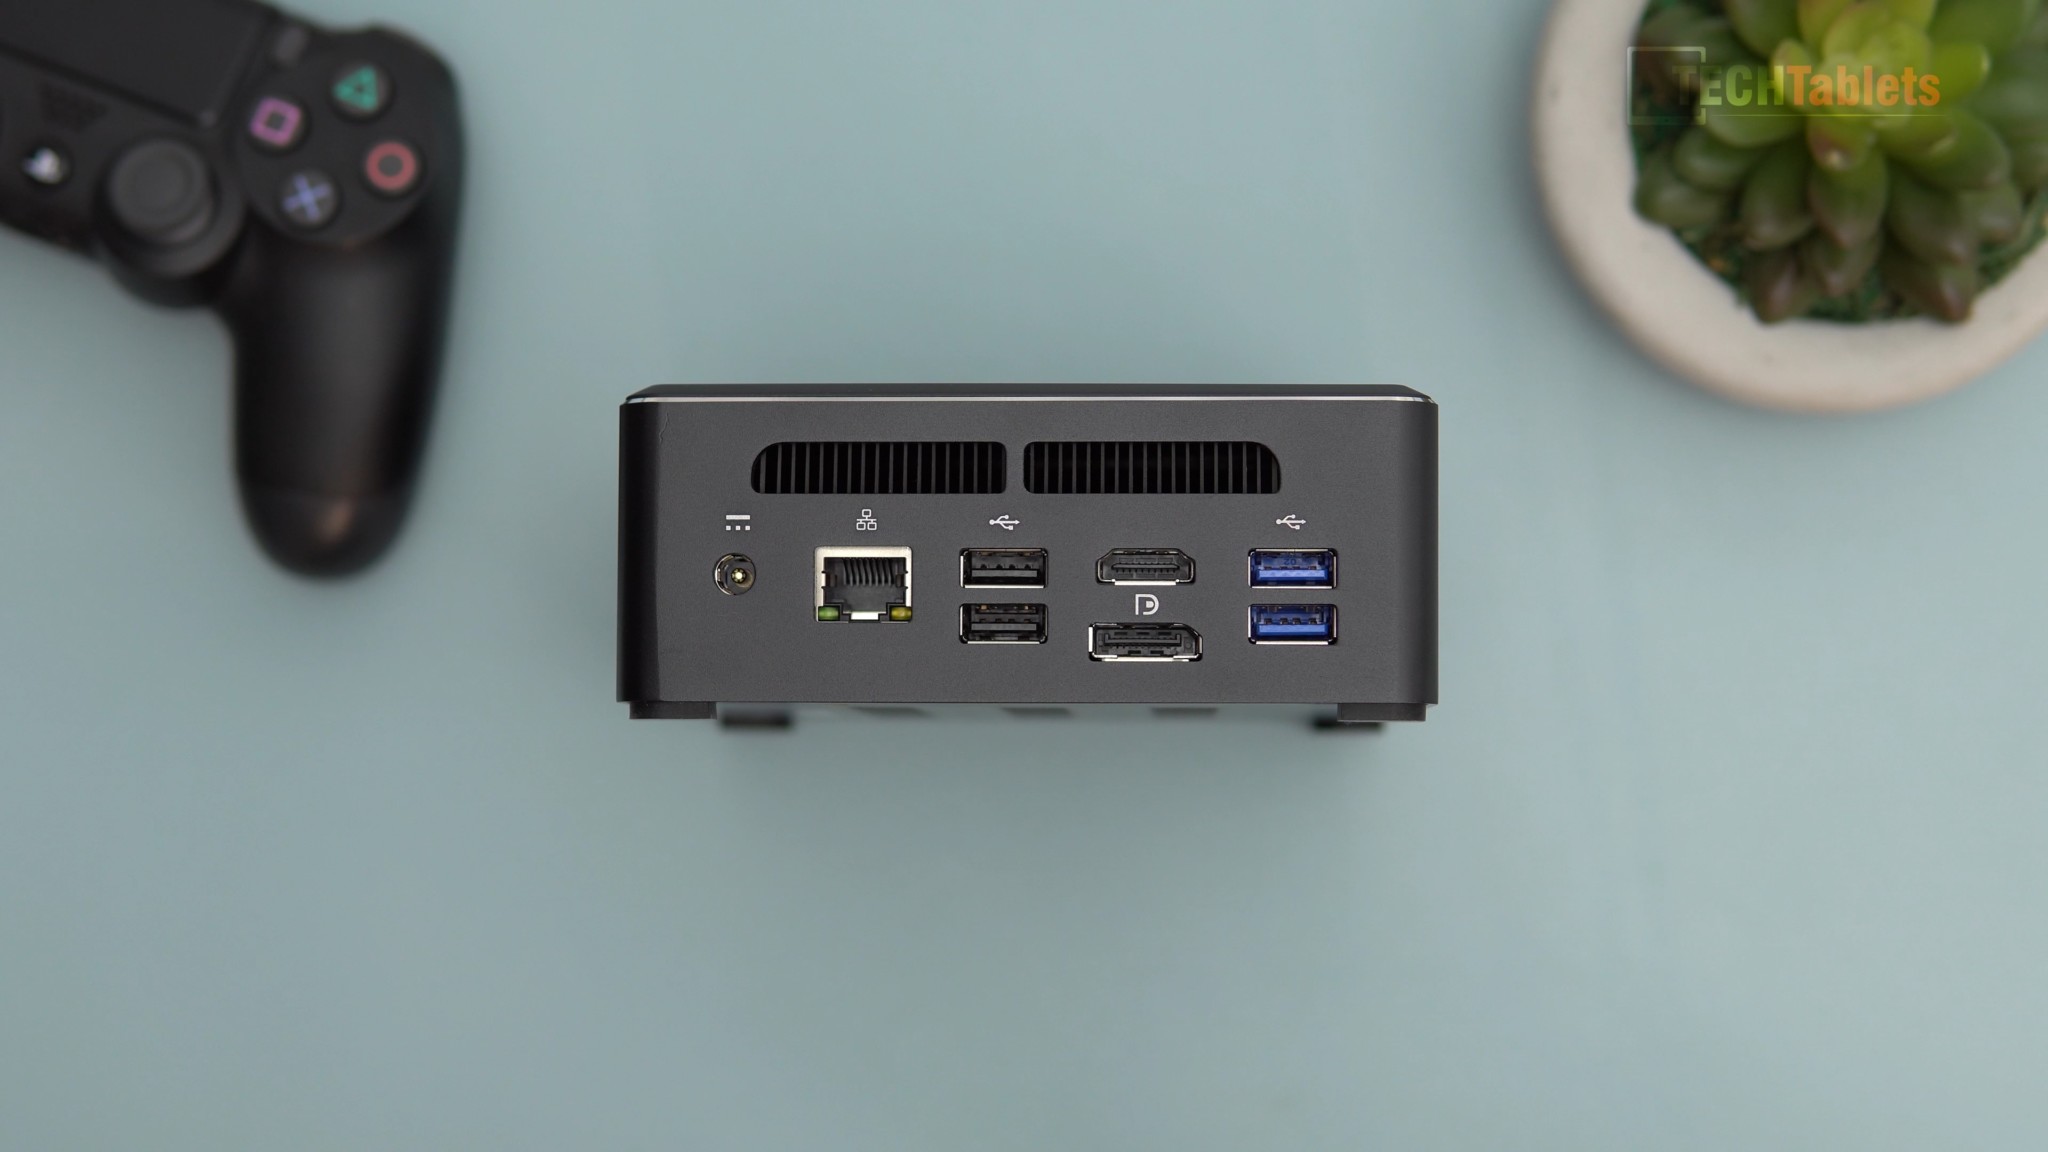 11.11 Price Update. The Best Budget Mini PC Reviewed & Now Only 